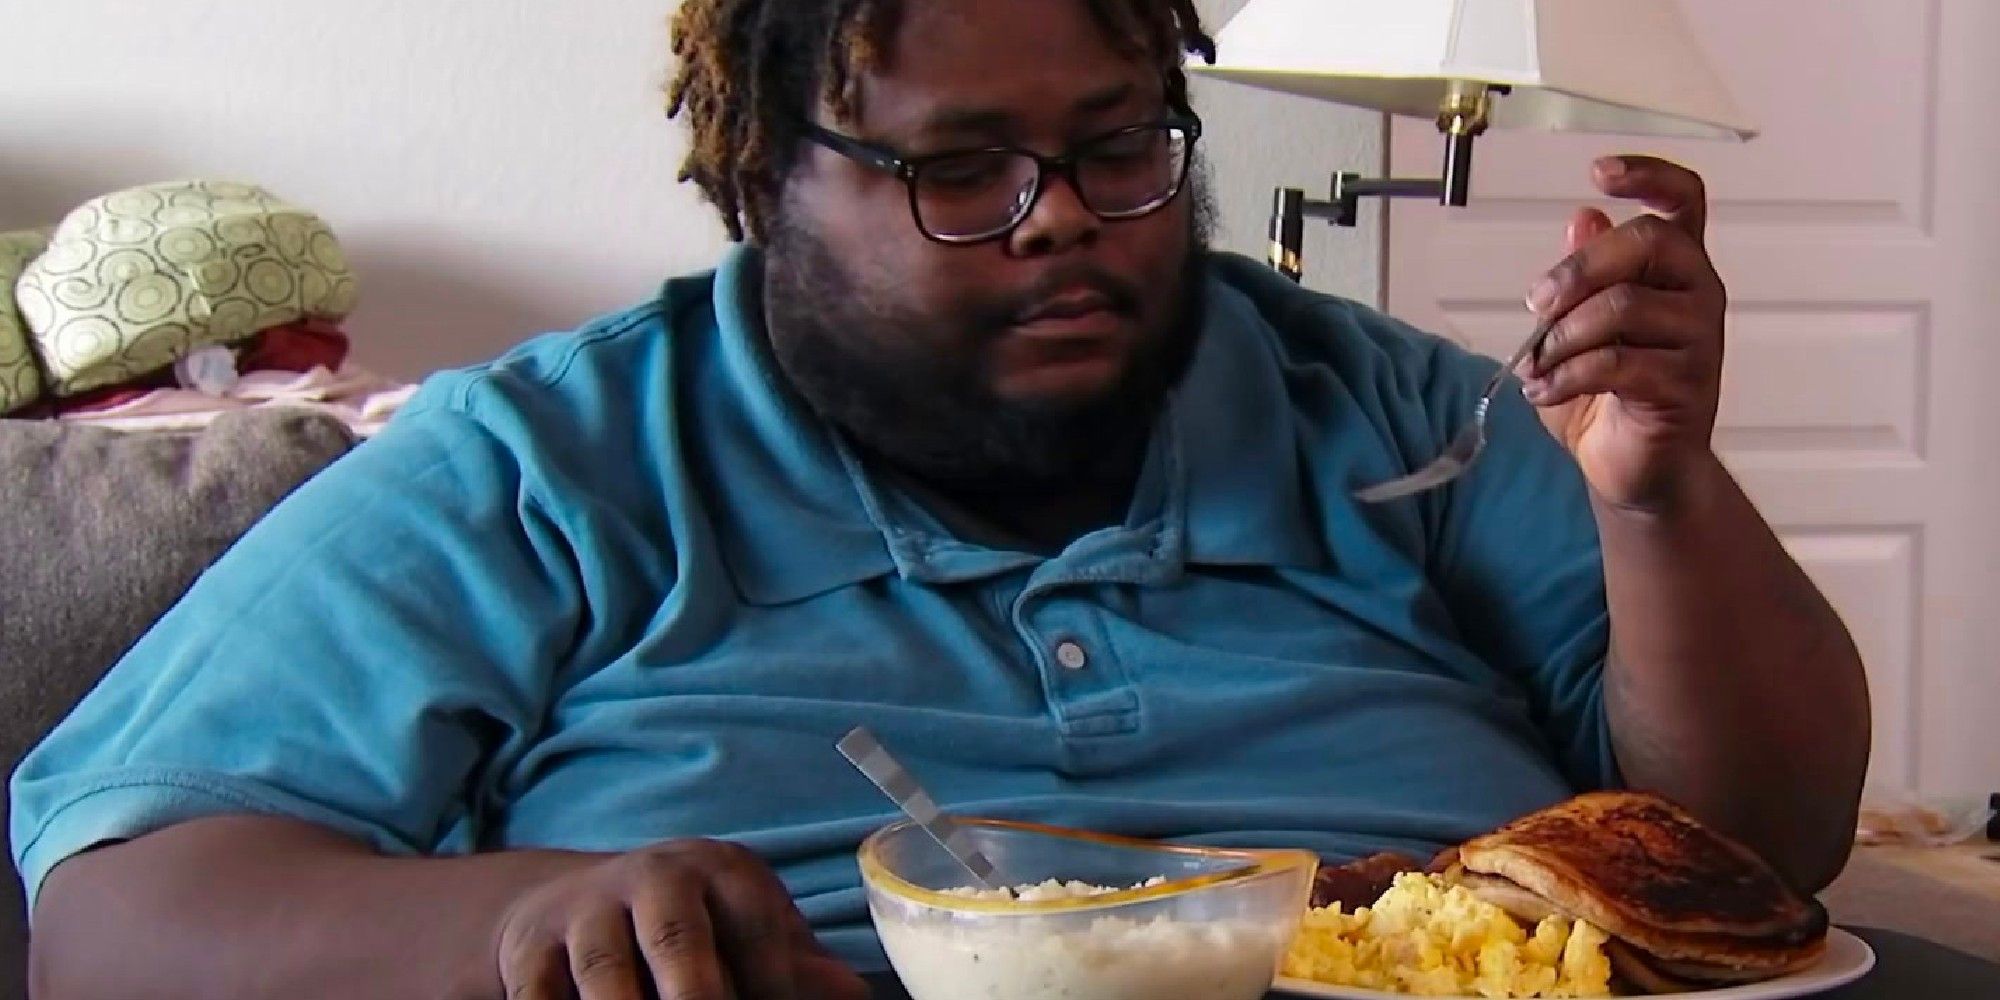 My 600-lb Life's Travis Henry eating food with blue shirt on